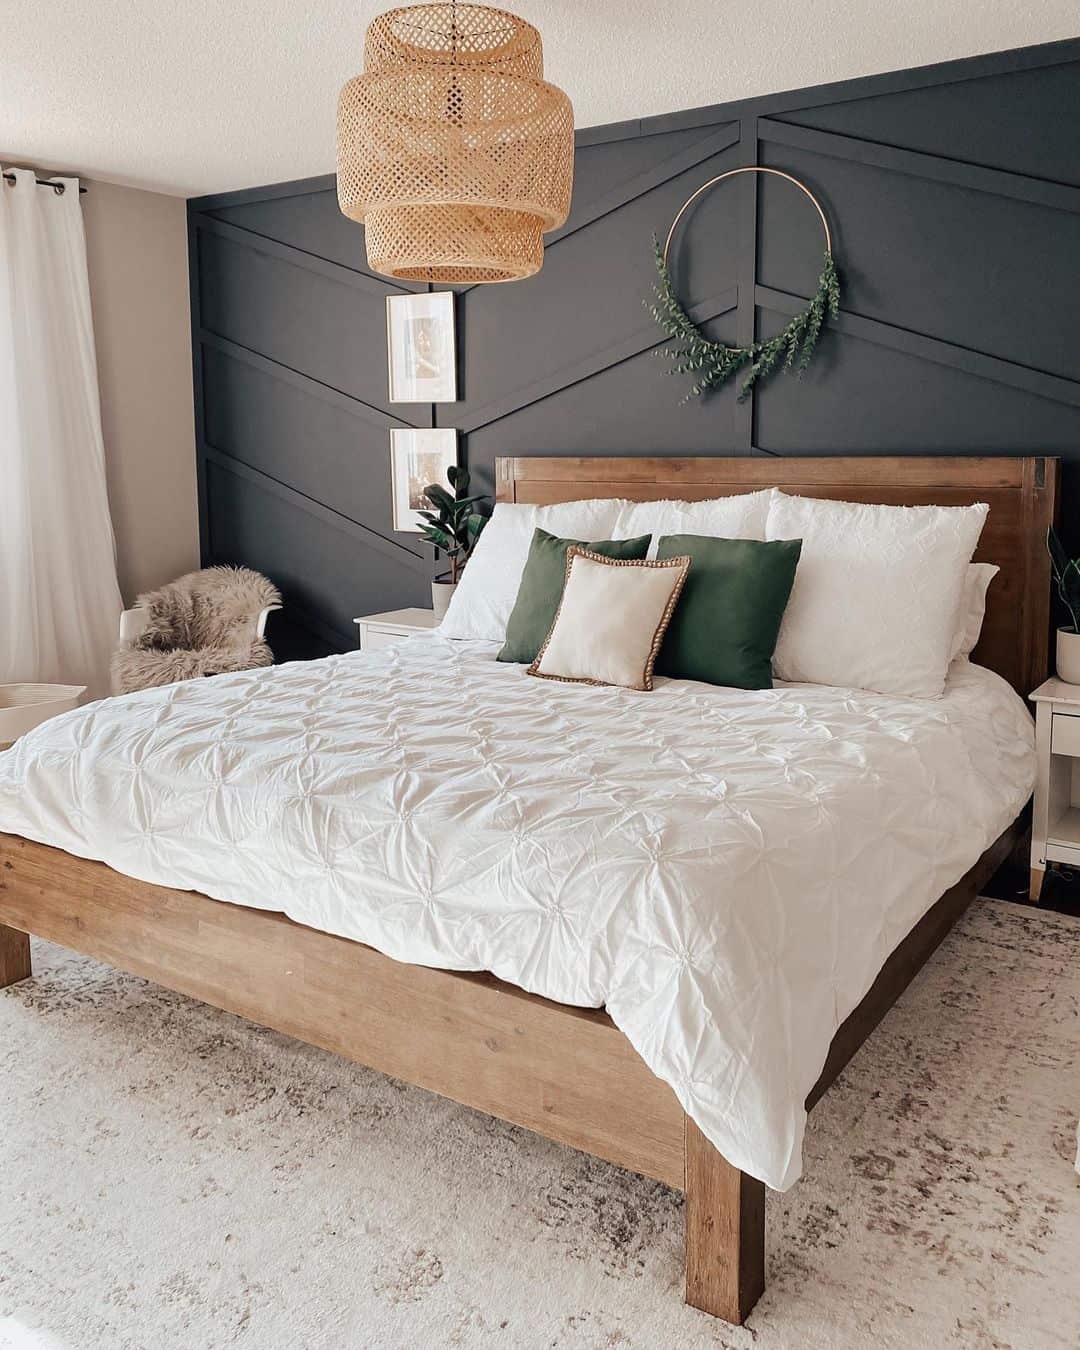 Rustic Charm with a Natural Wood Bed in Farmhouse Style